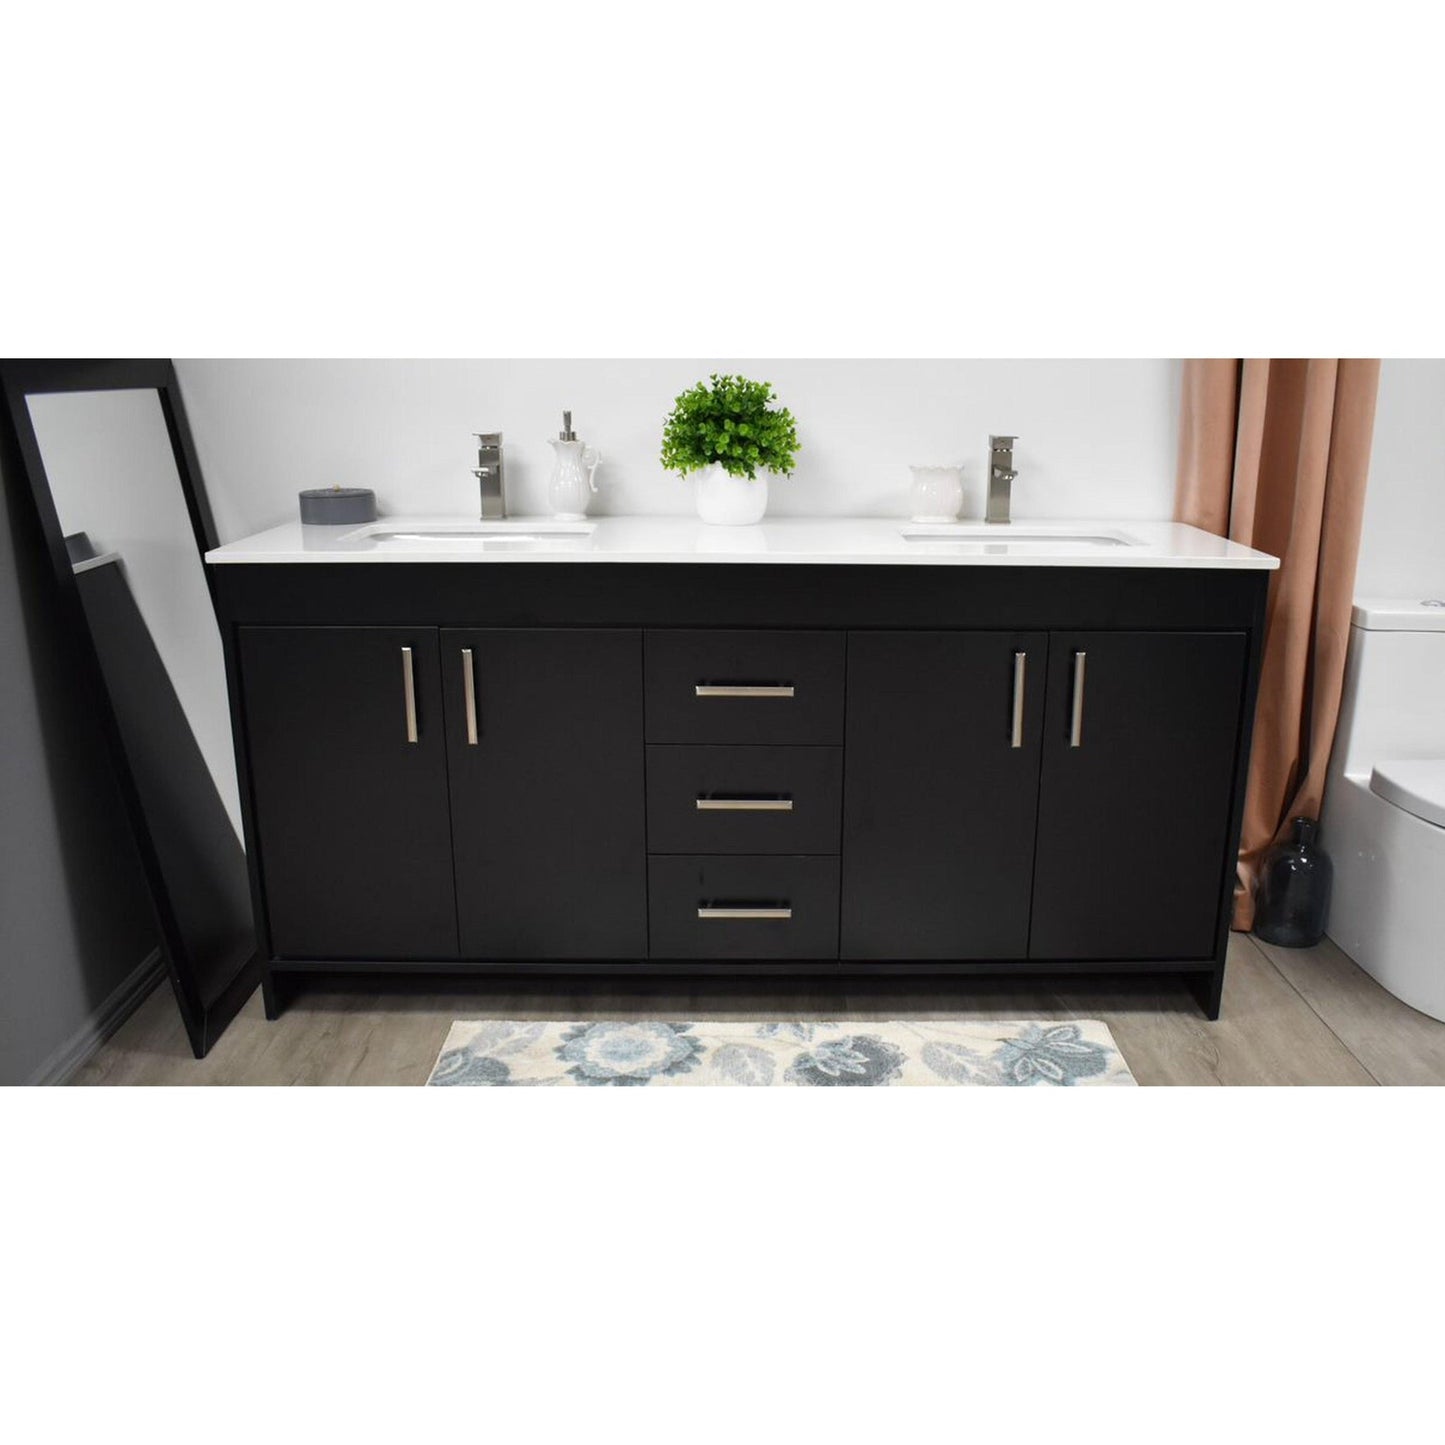 Volpa USA Capri 60" x 22" Black Freestanding Modern Bathroom Vanity With Undermount Double Sink and White Microstone Top With Brushed Nickel Edge Handles